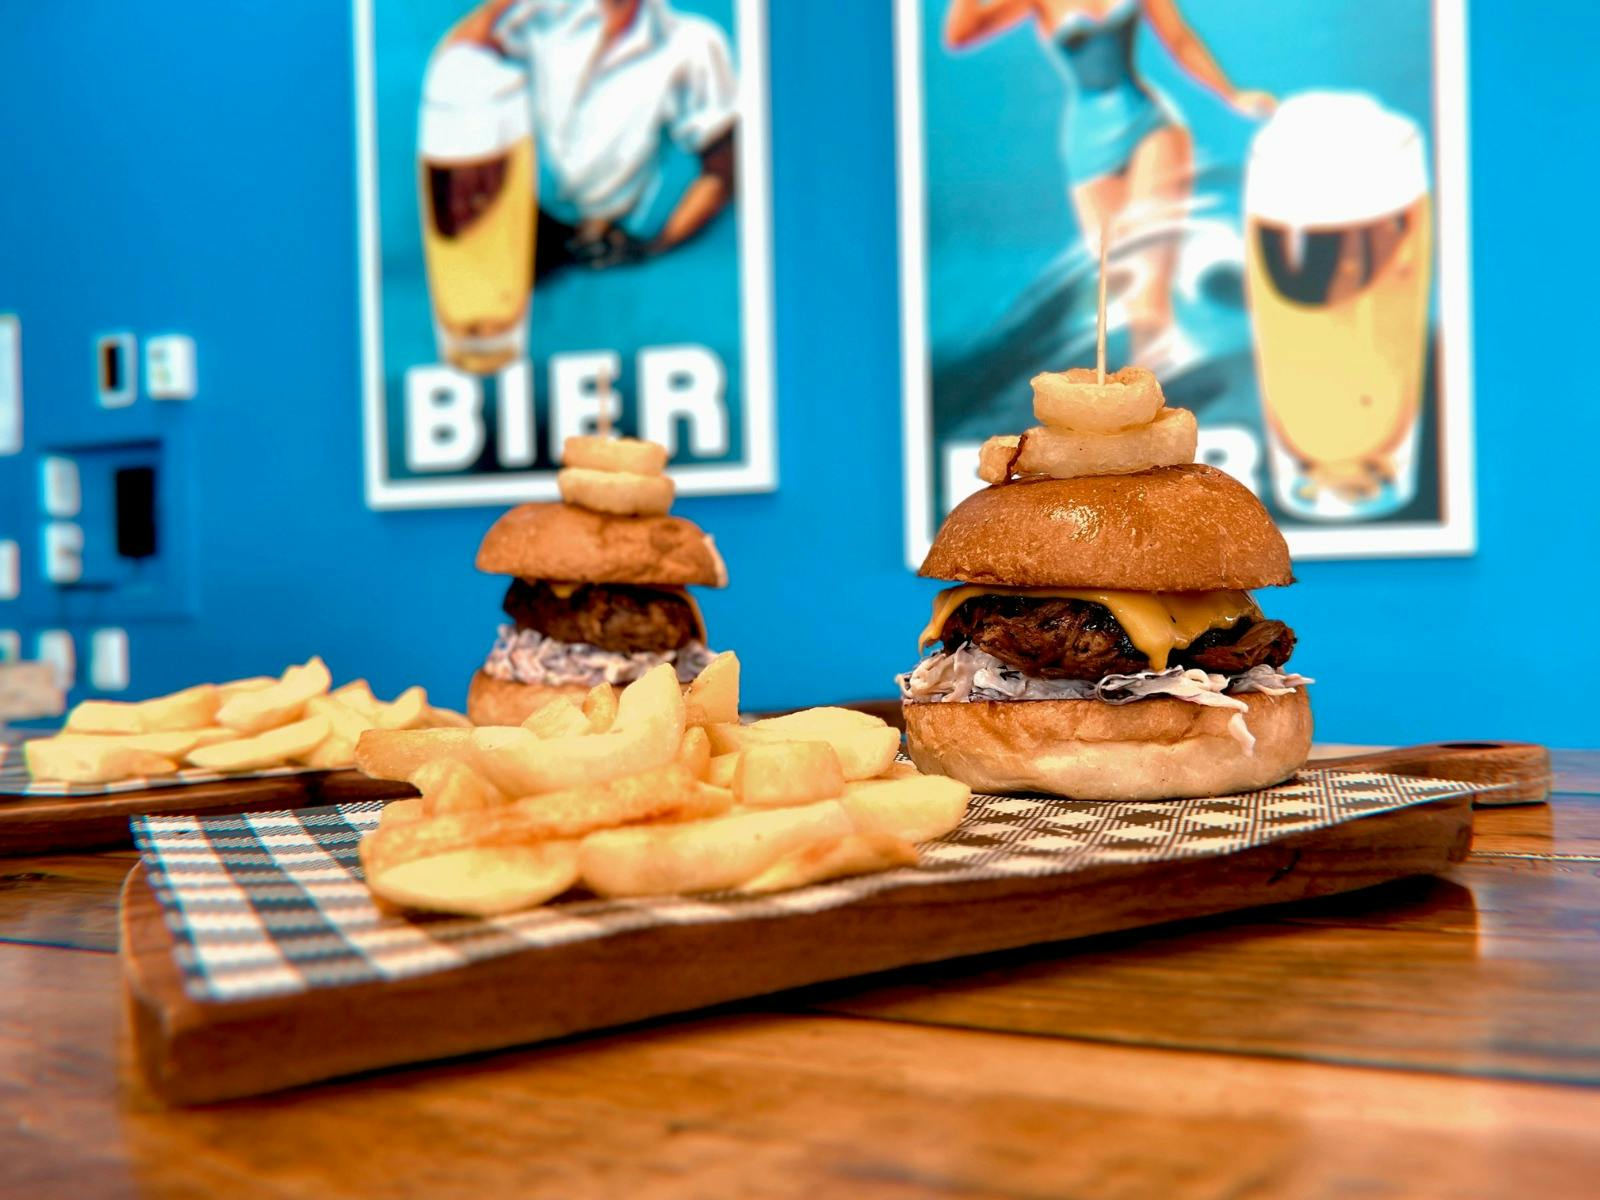 Hot chips and burgers in front of our blue branding and wall art